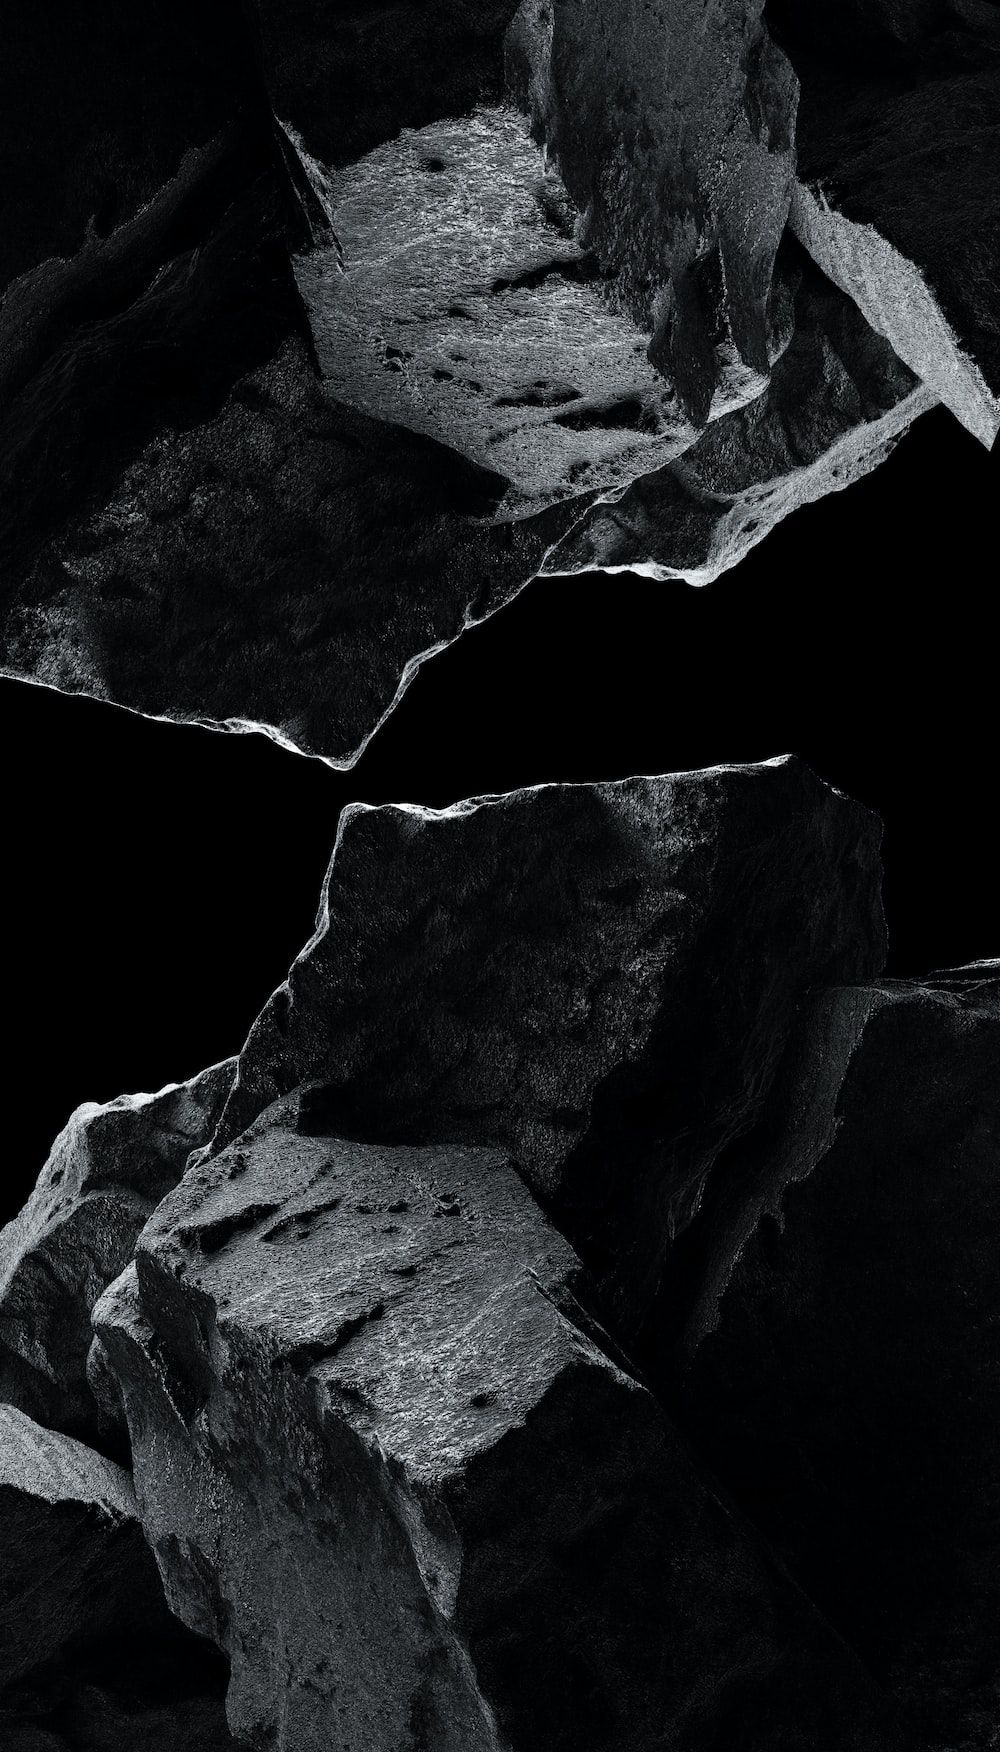 A black and white picture of rocks - Clean, black and white